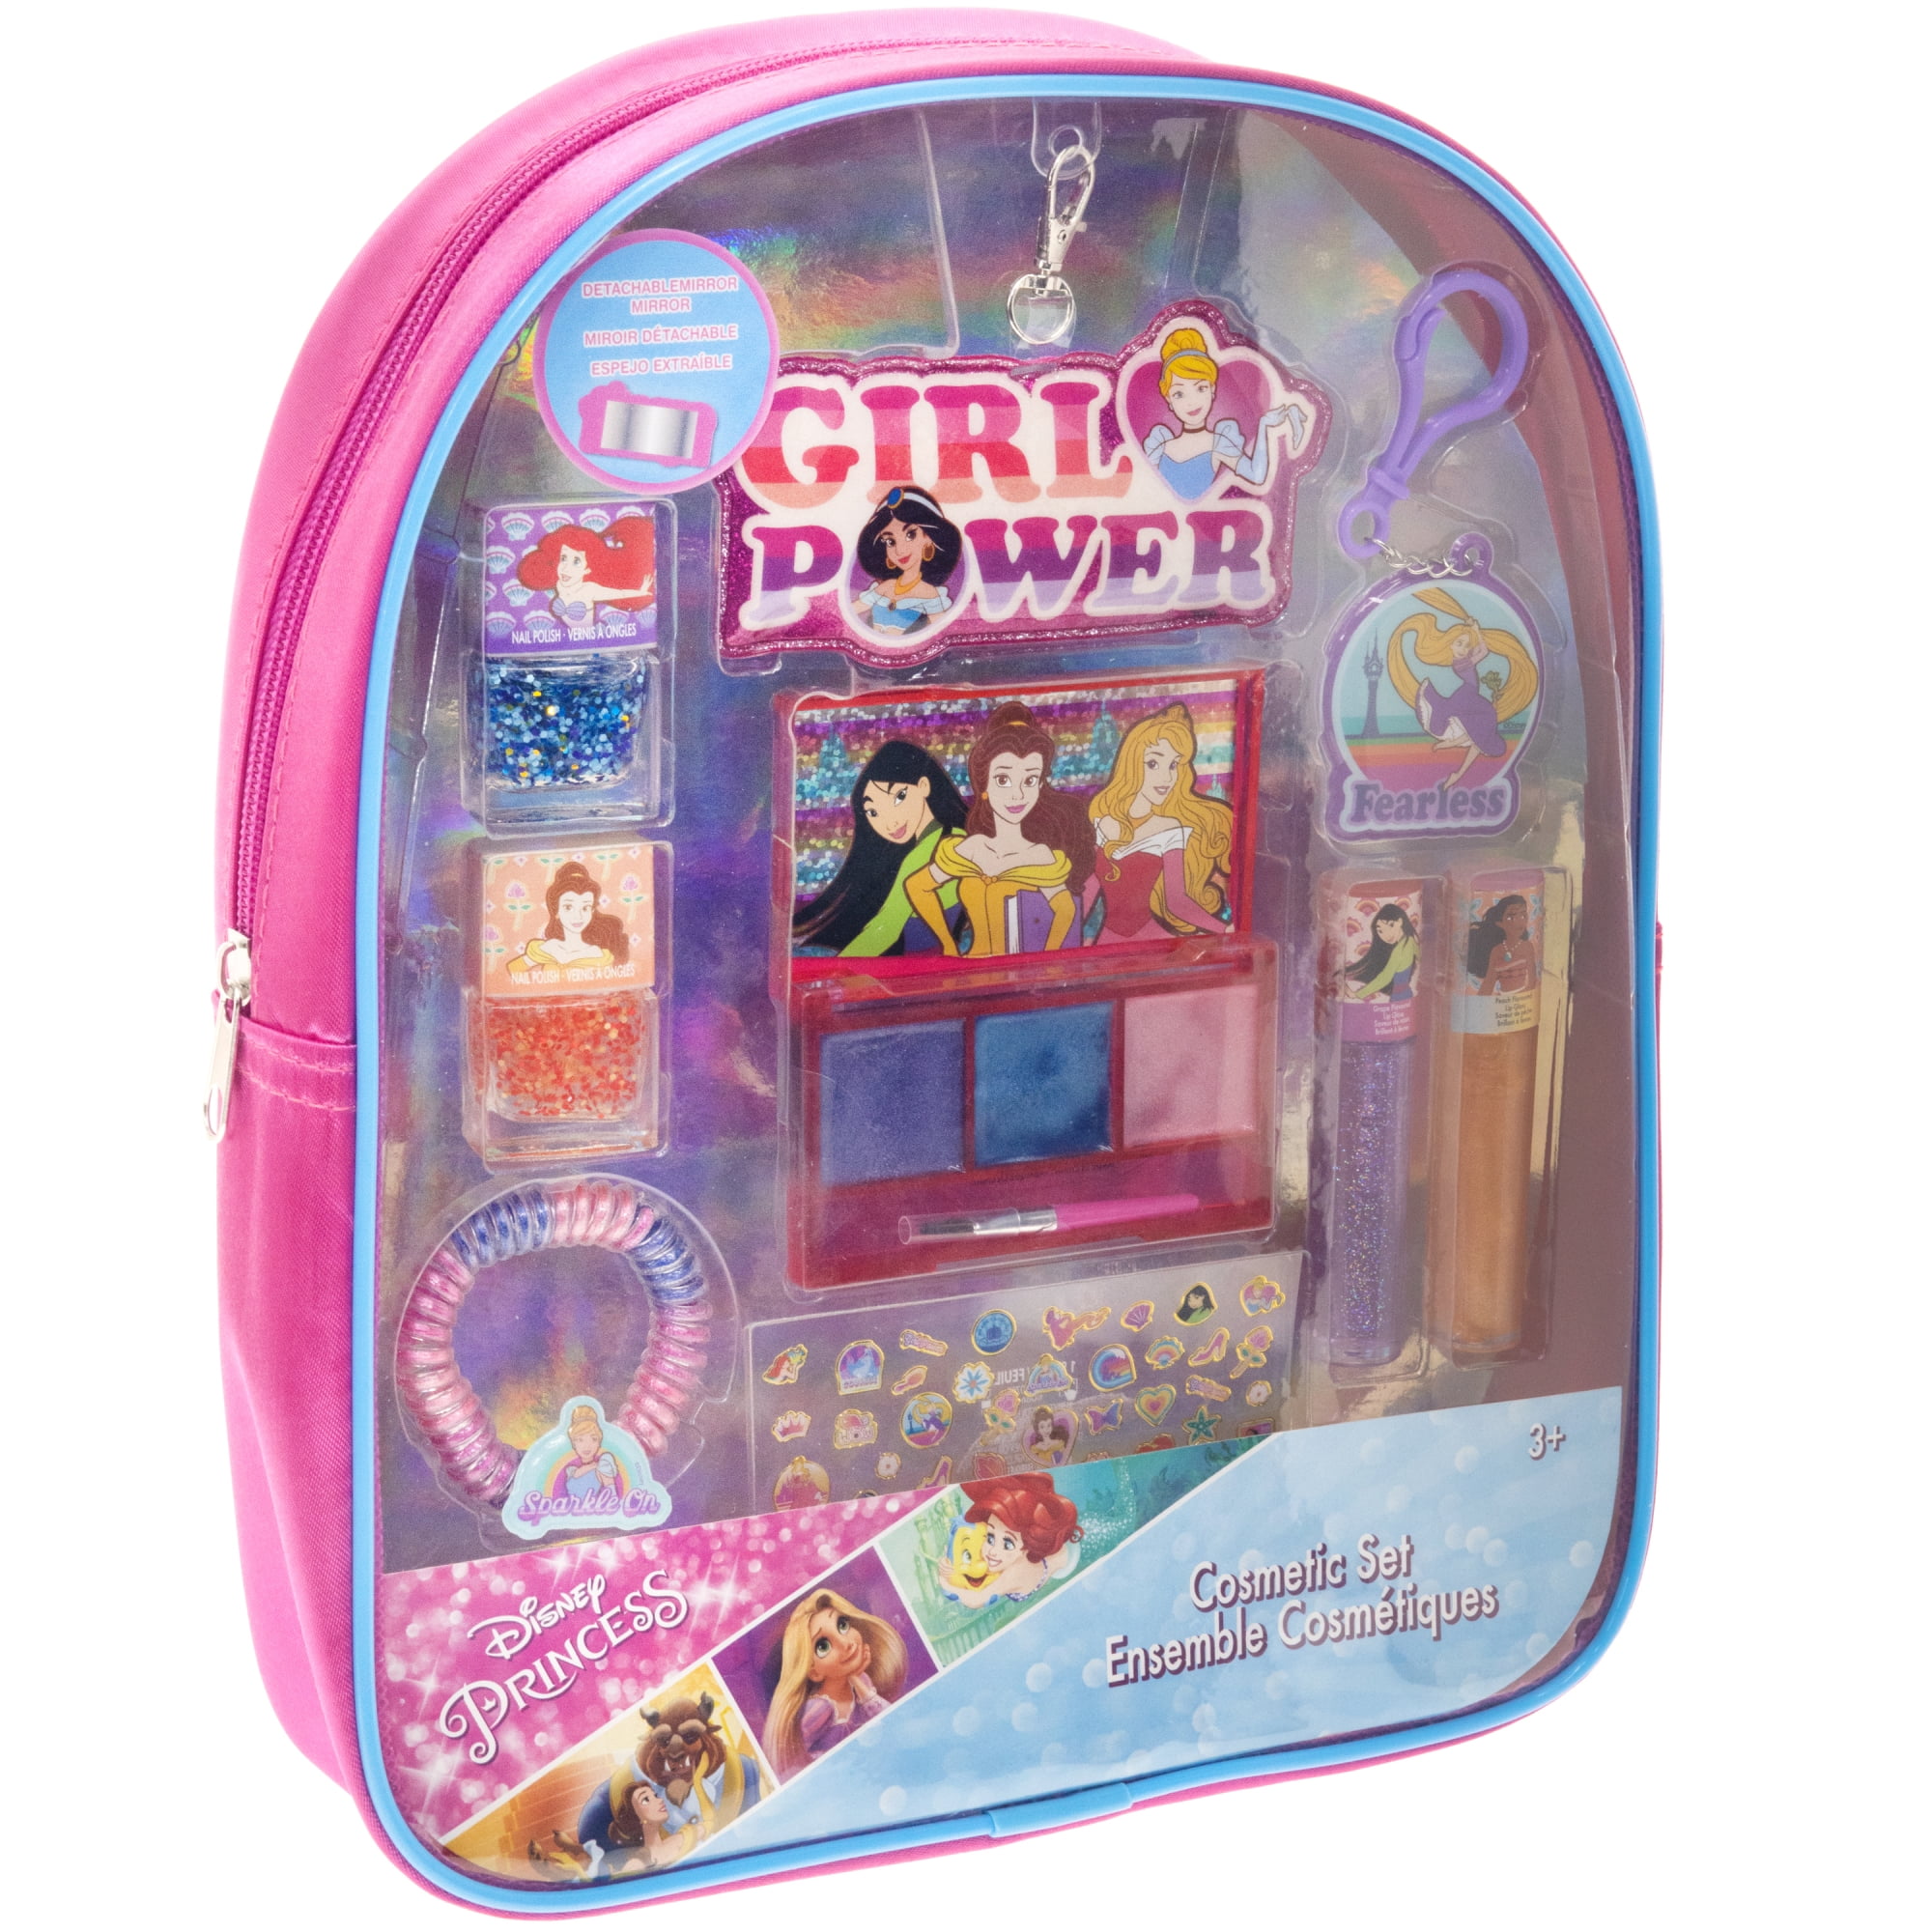 Disney Princess - Townley Girl Beauty Makeup Cosmetic Backpack Set for Girls, Ages 3+